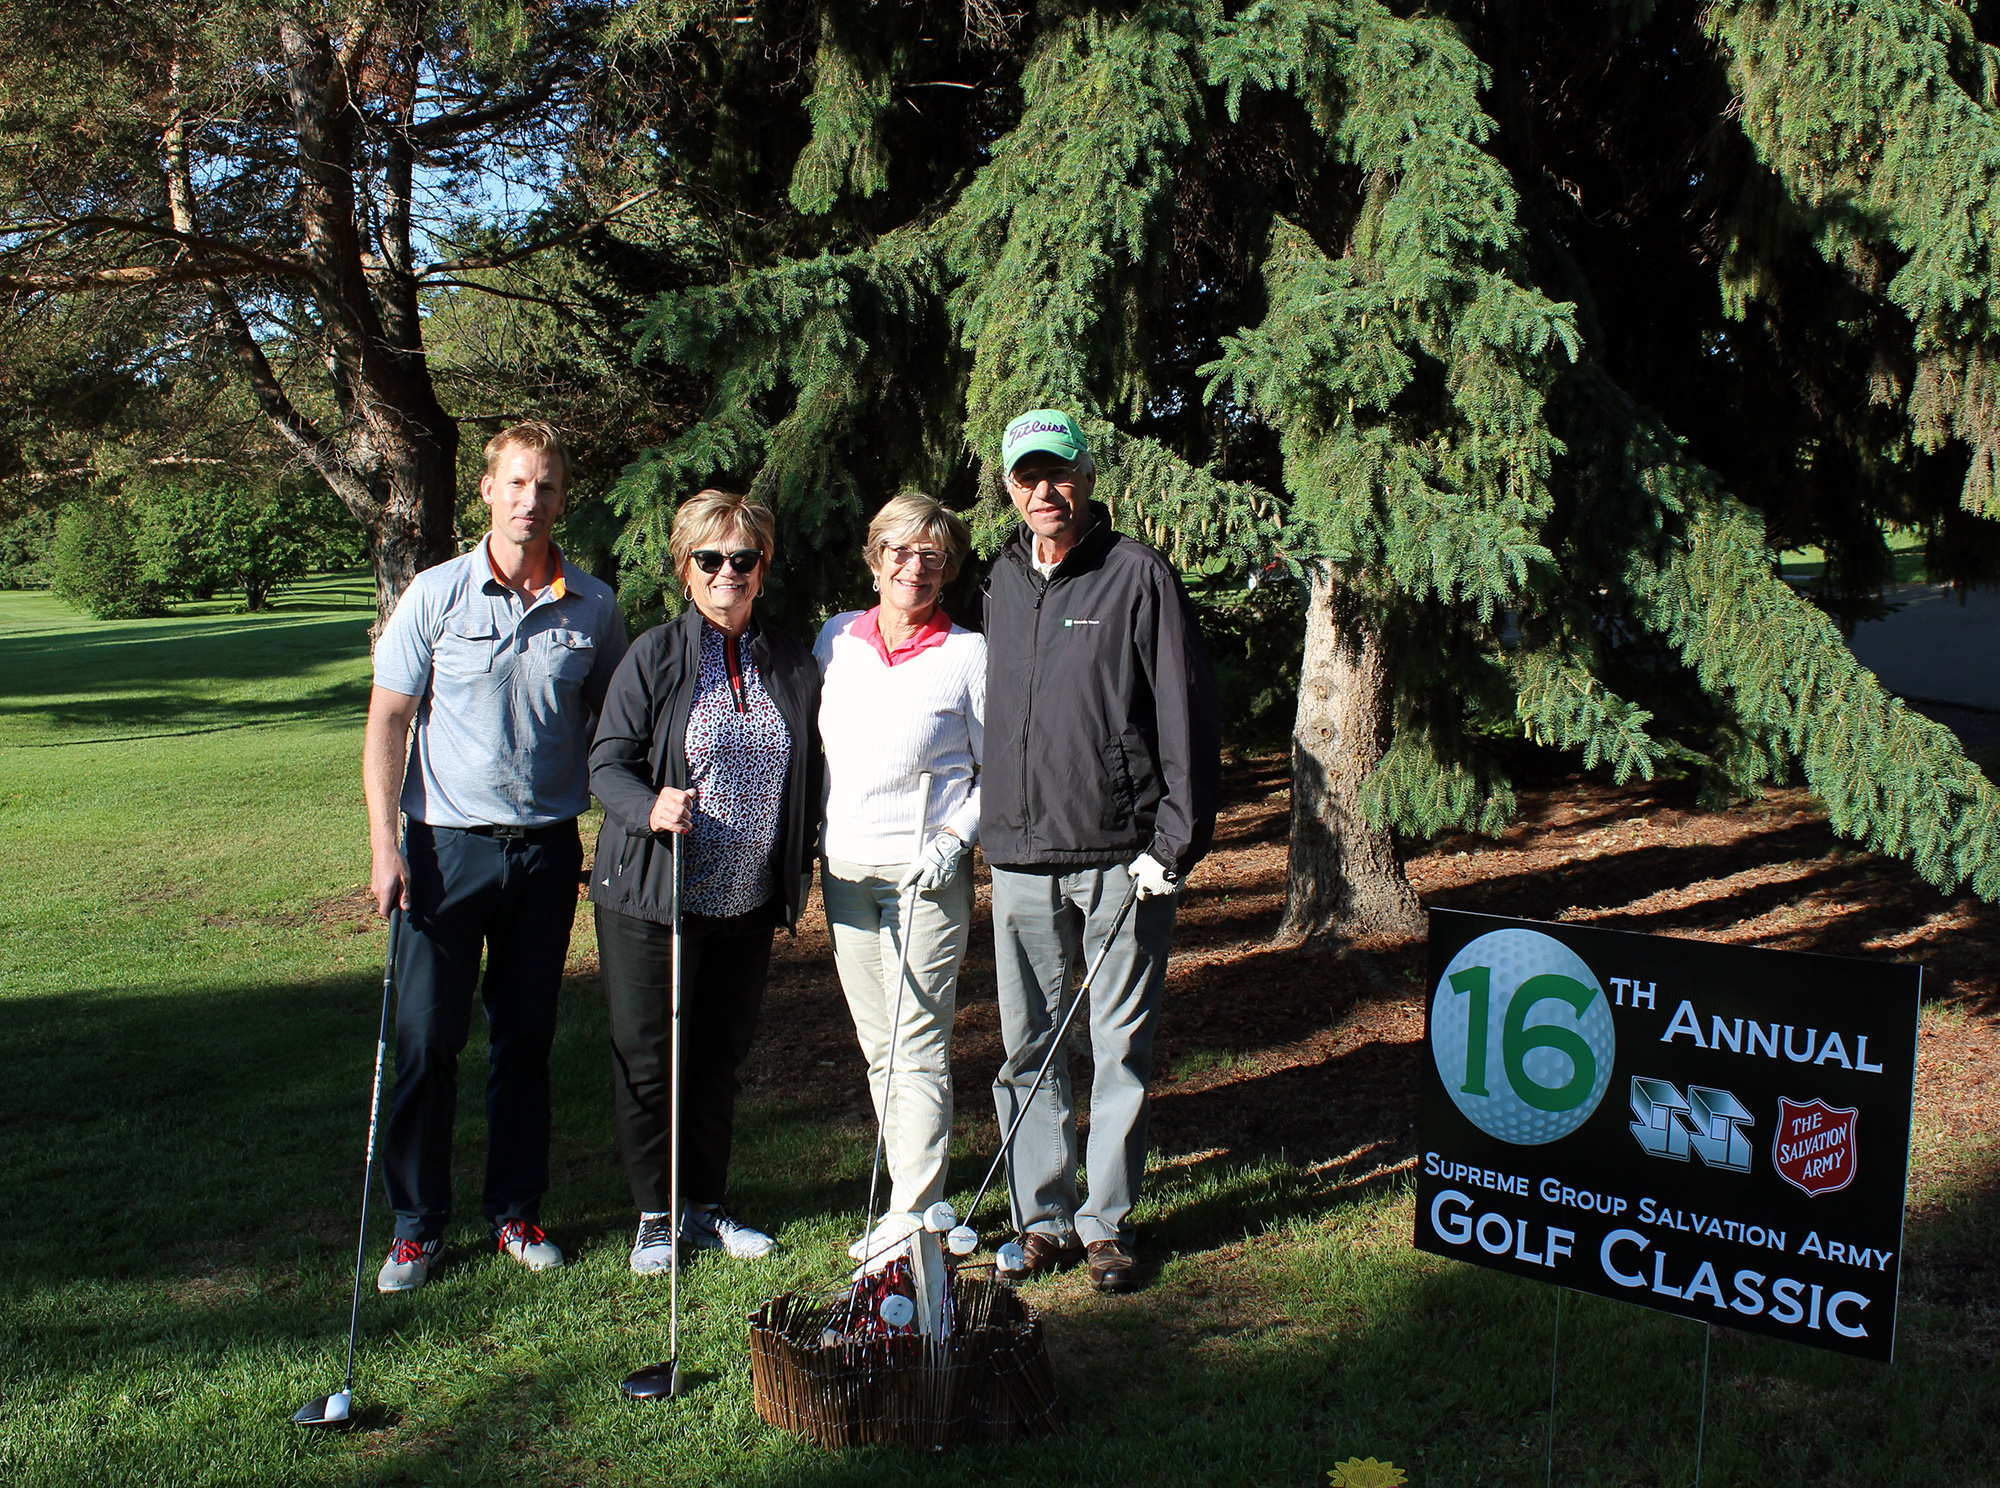 16th Annual Supreme Group Salvation Army Golf Classic